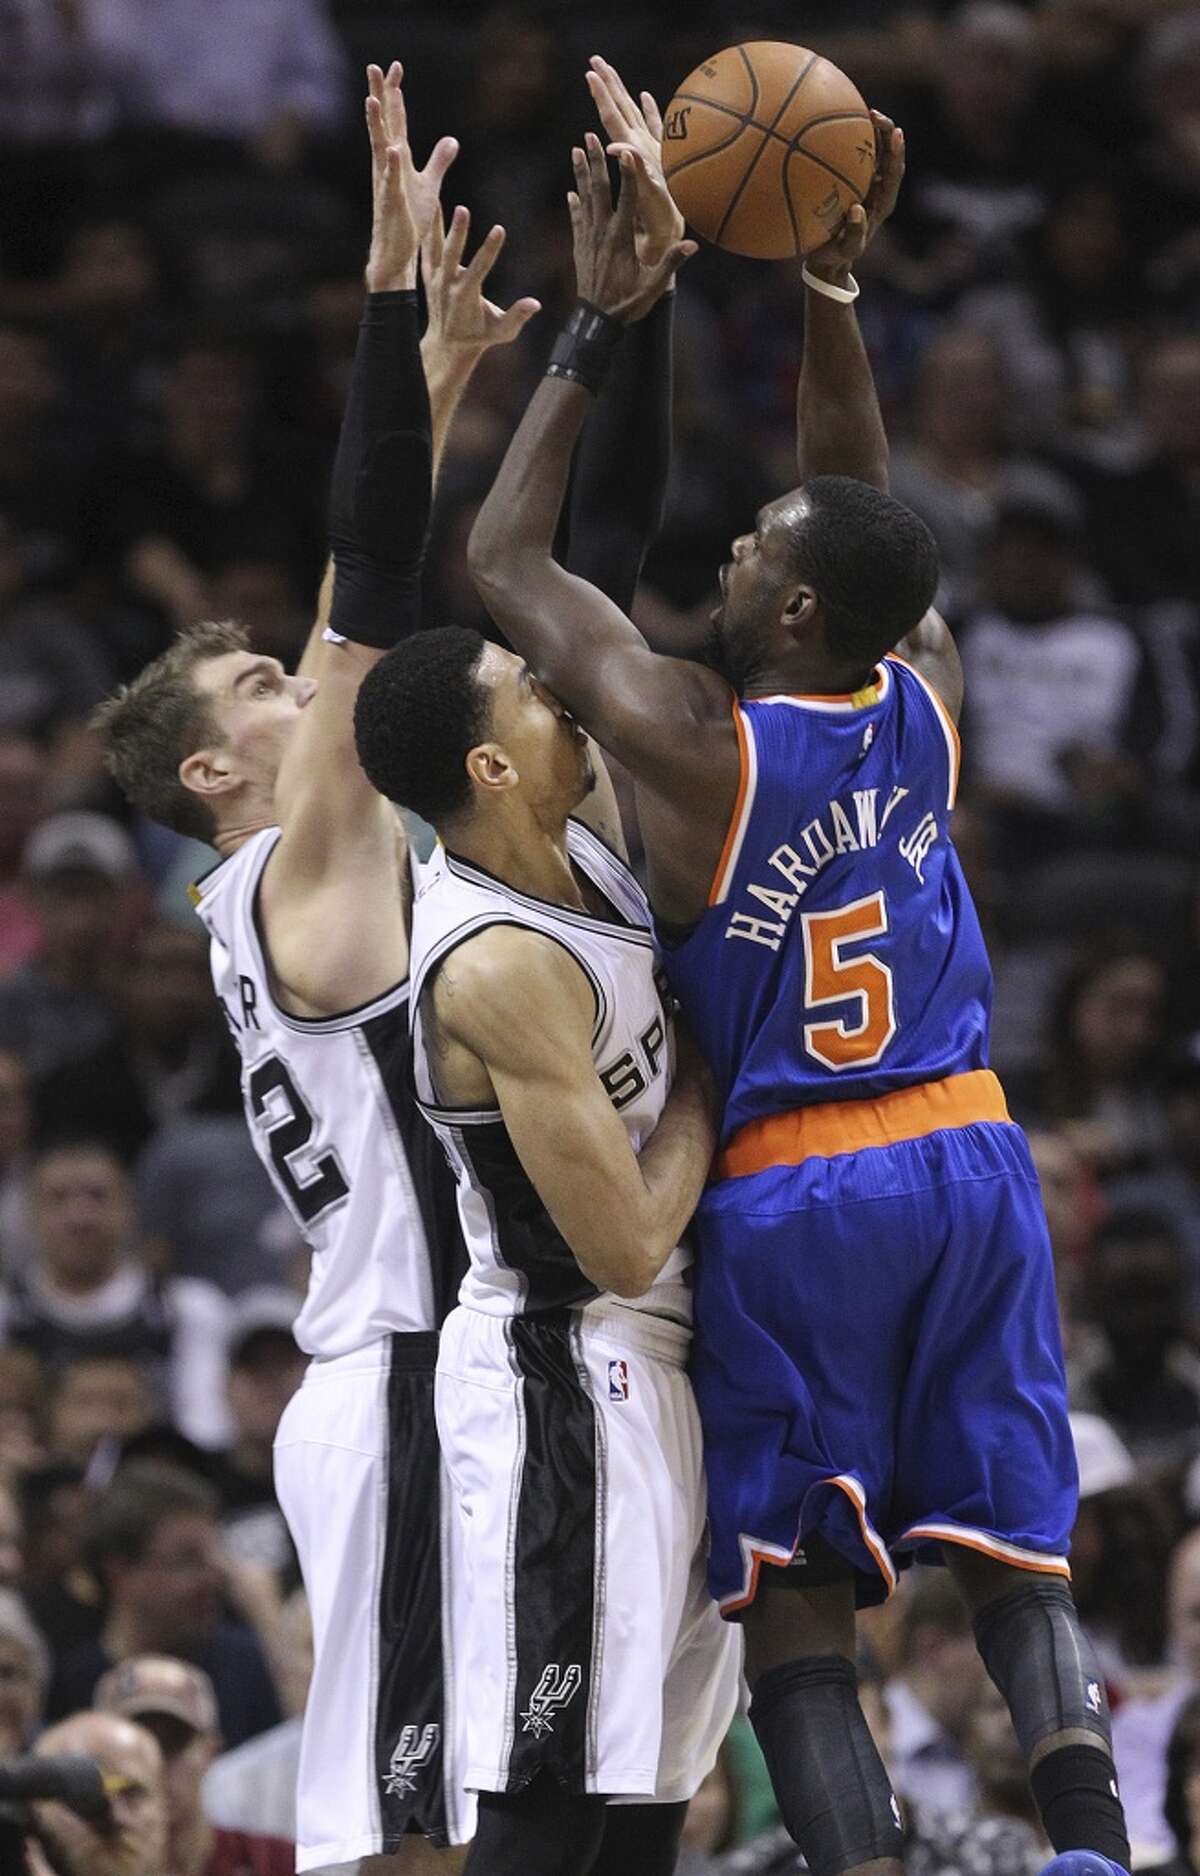 San Antonio Spurs' Danny Green and Tiago Splitter put pressure on New York Knicks' Tim Hardaway Jr. during the second half at the AT&T Center, Wednesday, Dec. 10, 2014. The Spurs won 109-95.